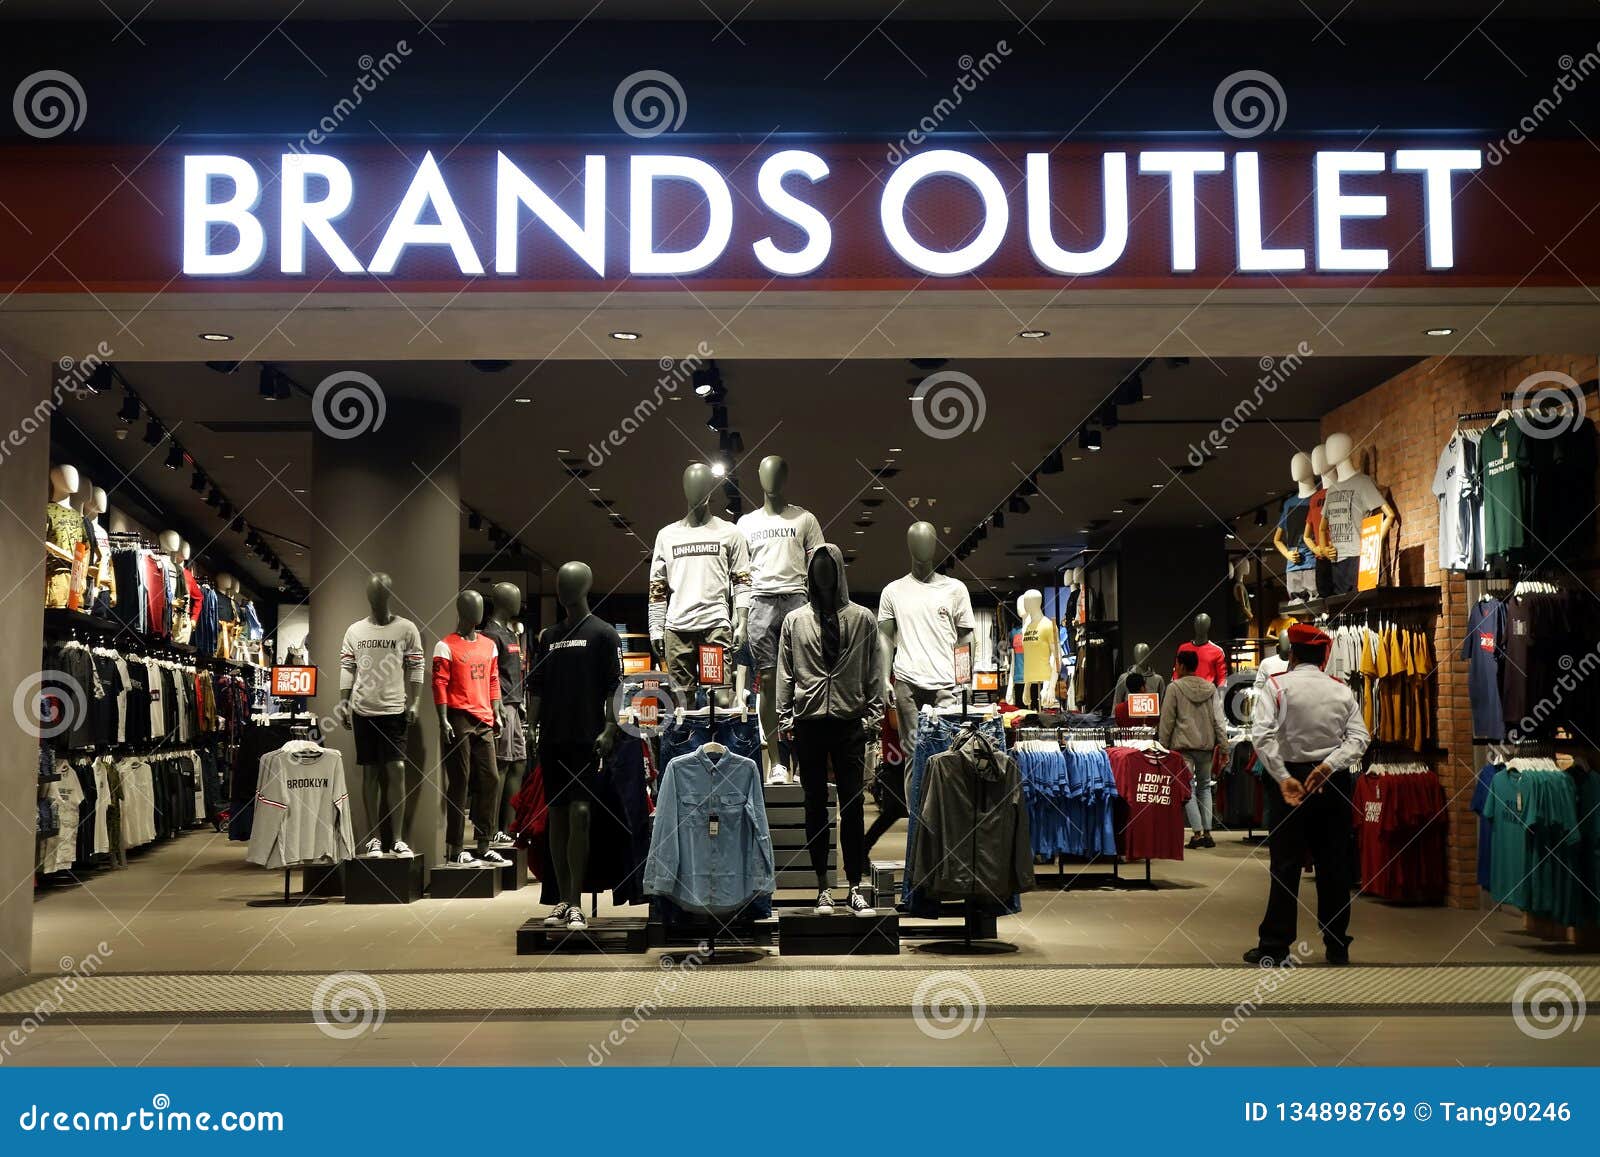 Me brand outlet near Outlet Stores